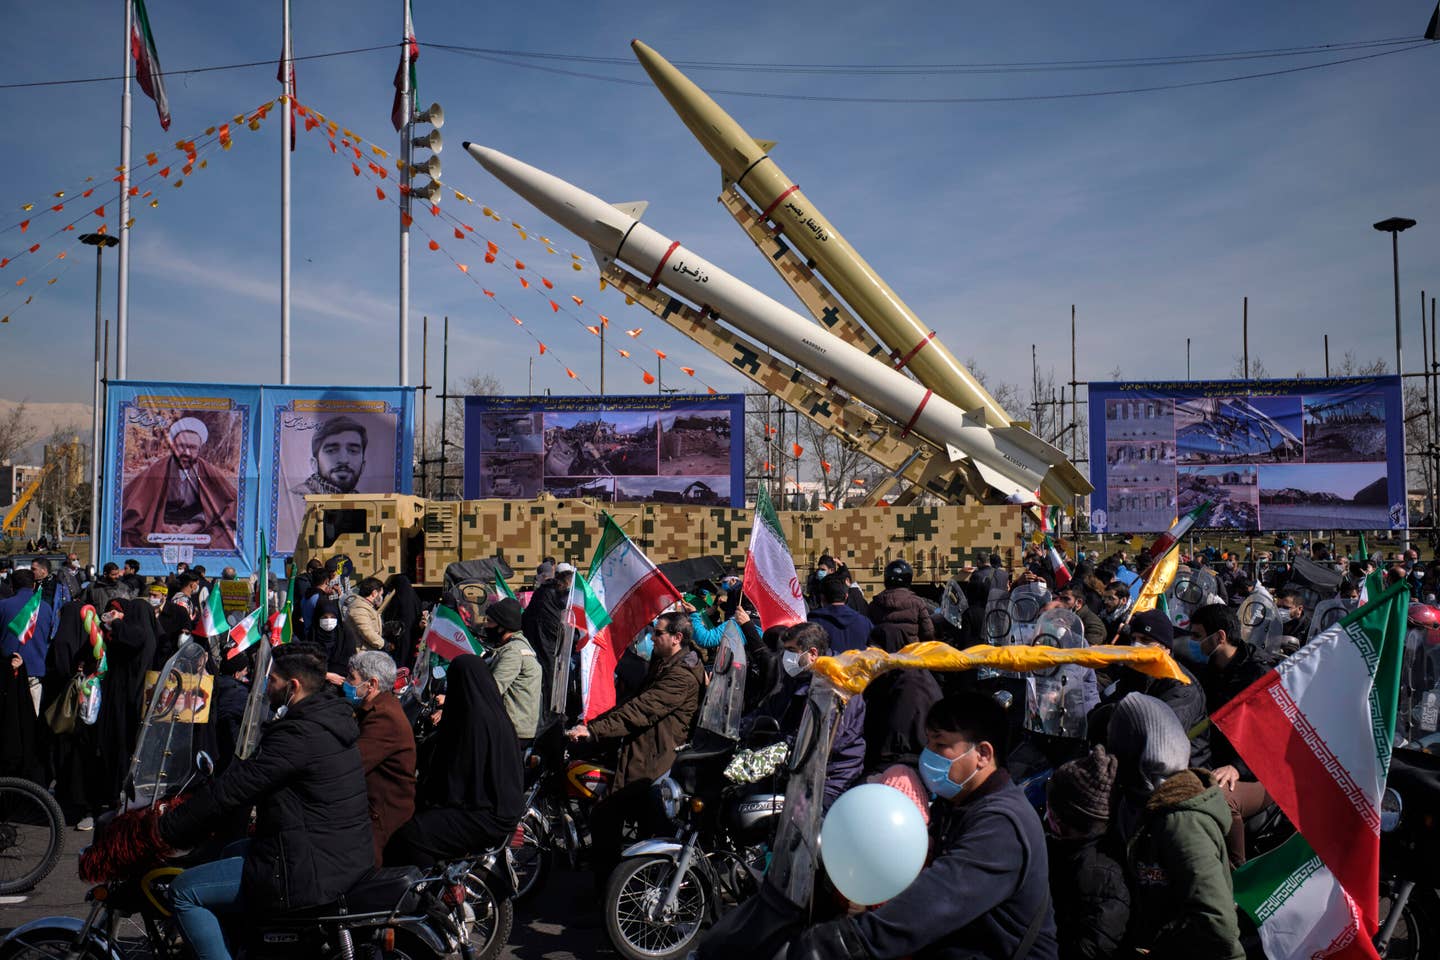 The growing threat from Iranian missiles is increasing cooperation between Israel and Arab nations. (Photo by Morteza Nikoubazl/NurPhoto via Getty Images)